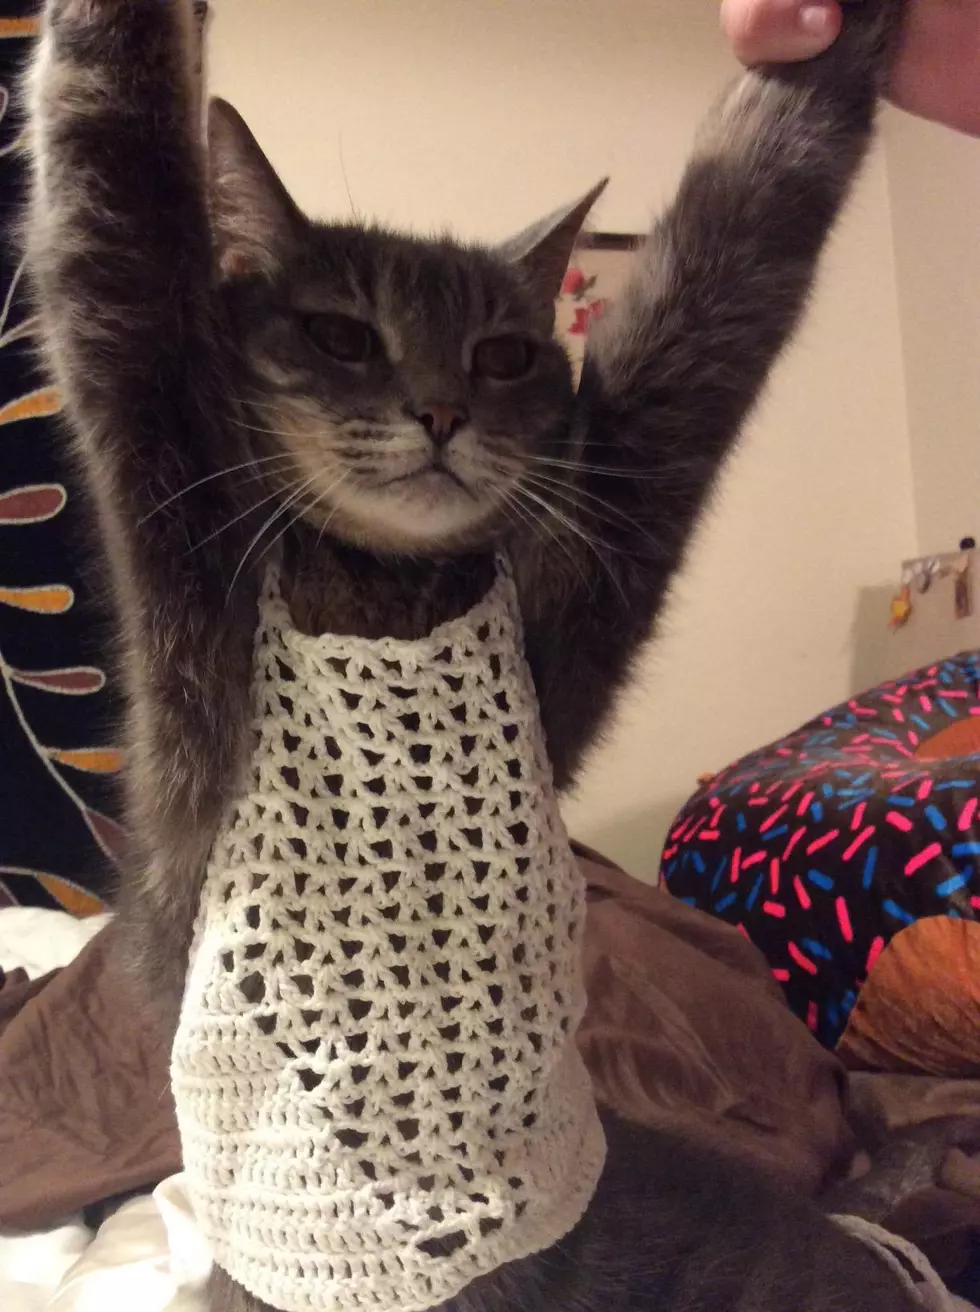 Mom Dresses Cat in Daugther’s Top to Prove How Small It Is [PHOTO]